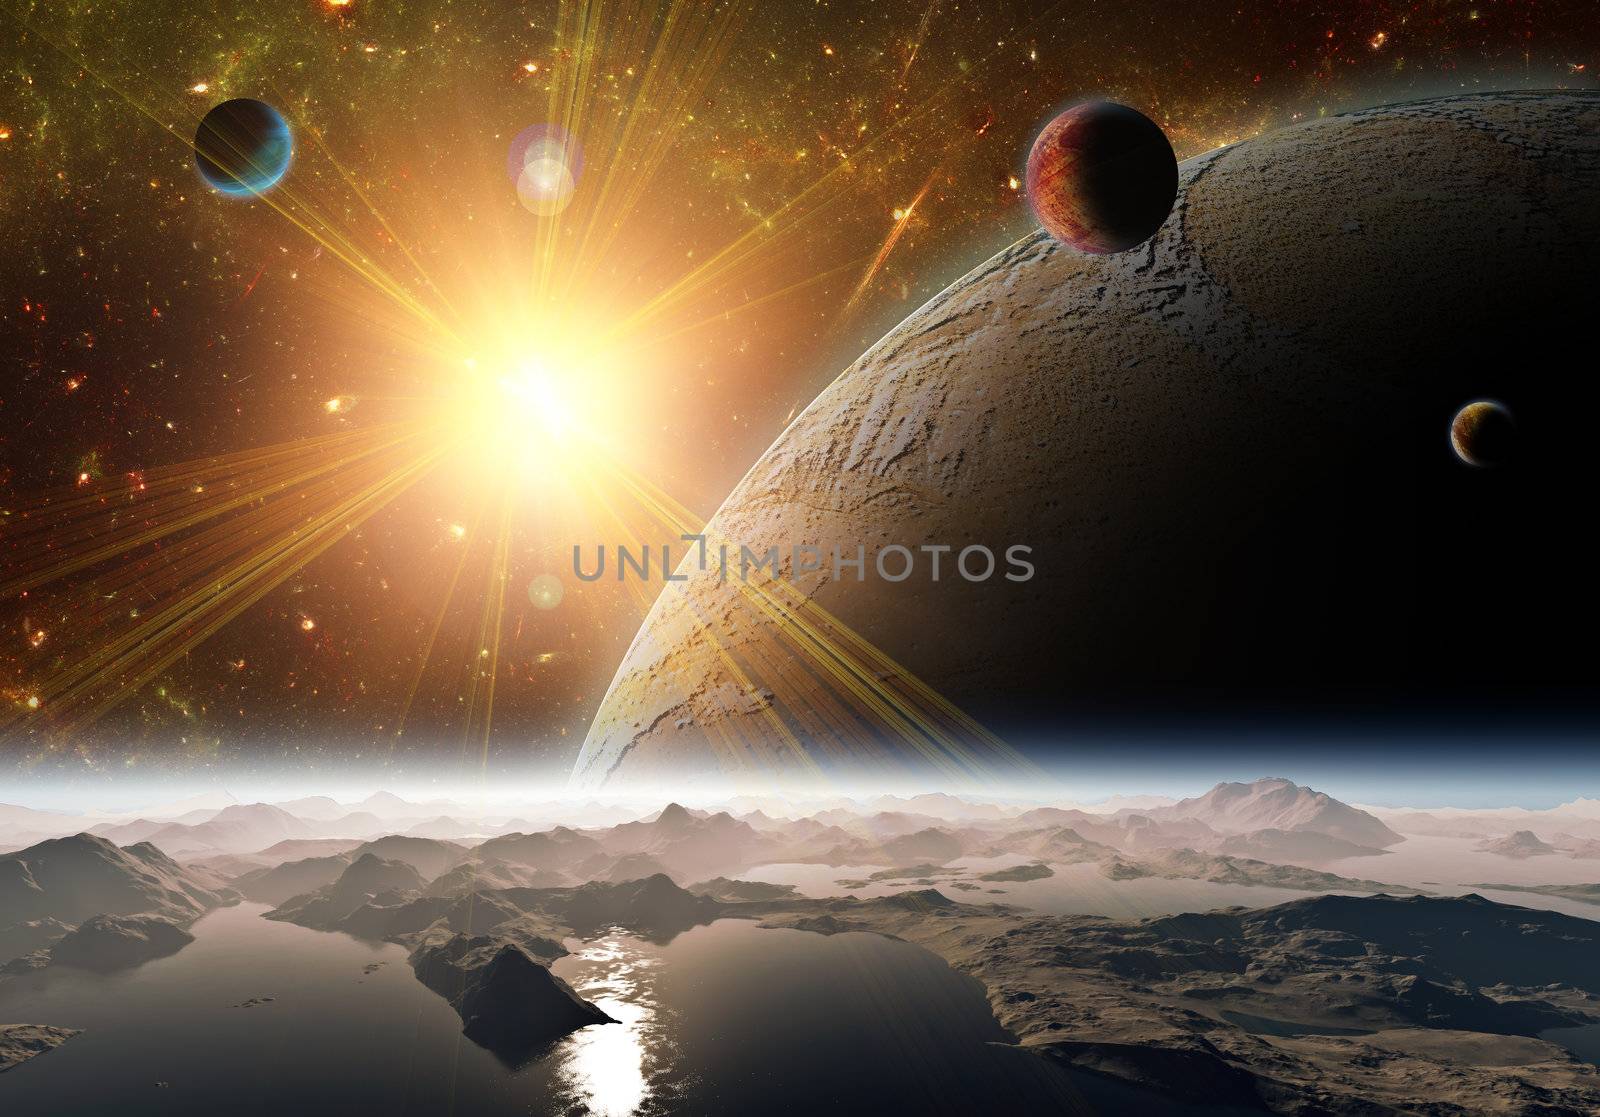 A view of planet, moons and the universe from the earth surface. Abstract illustration of distant regions.